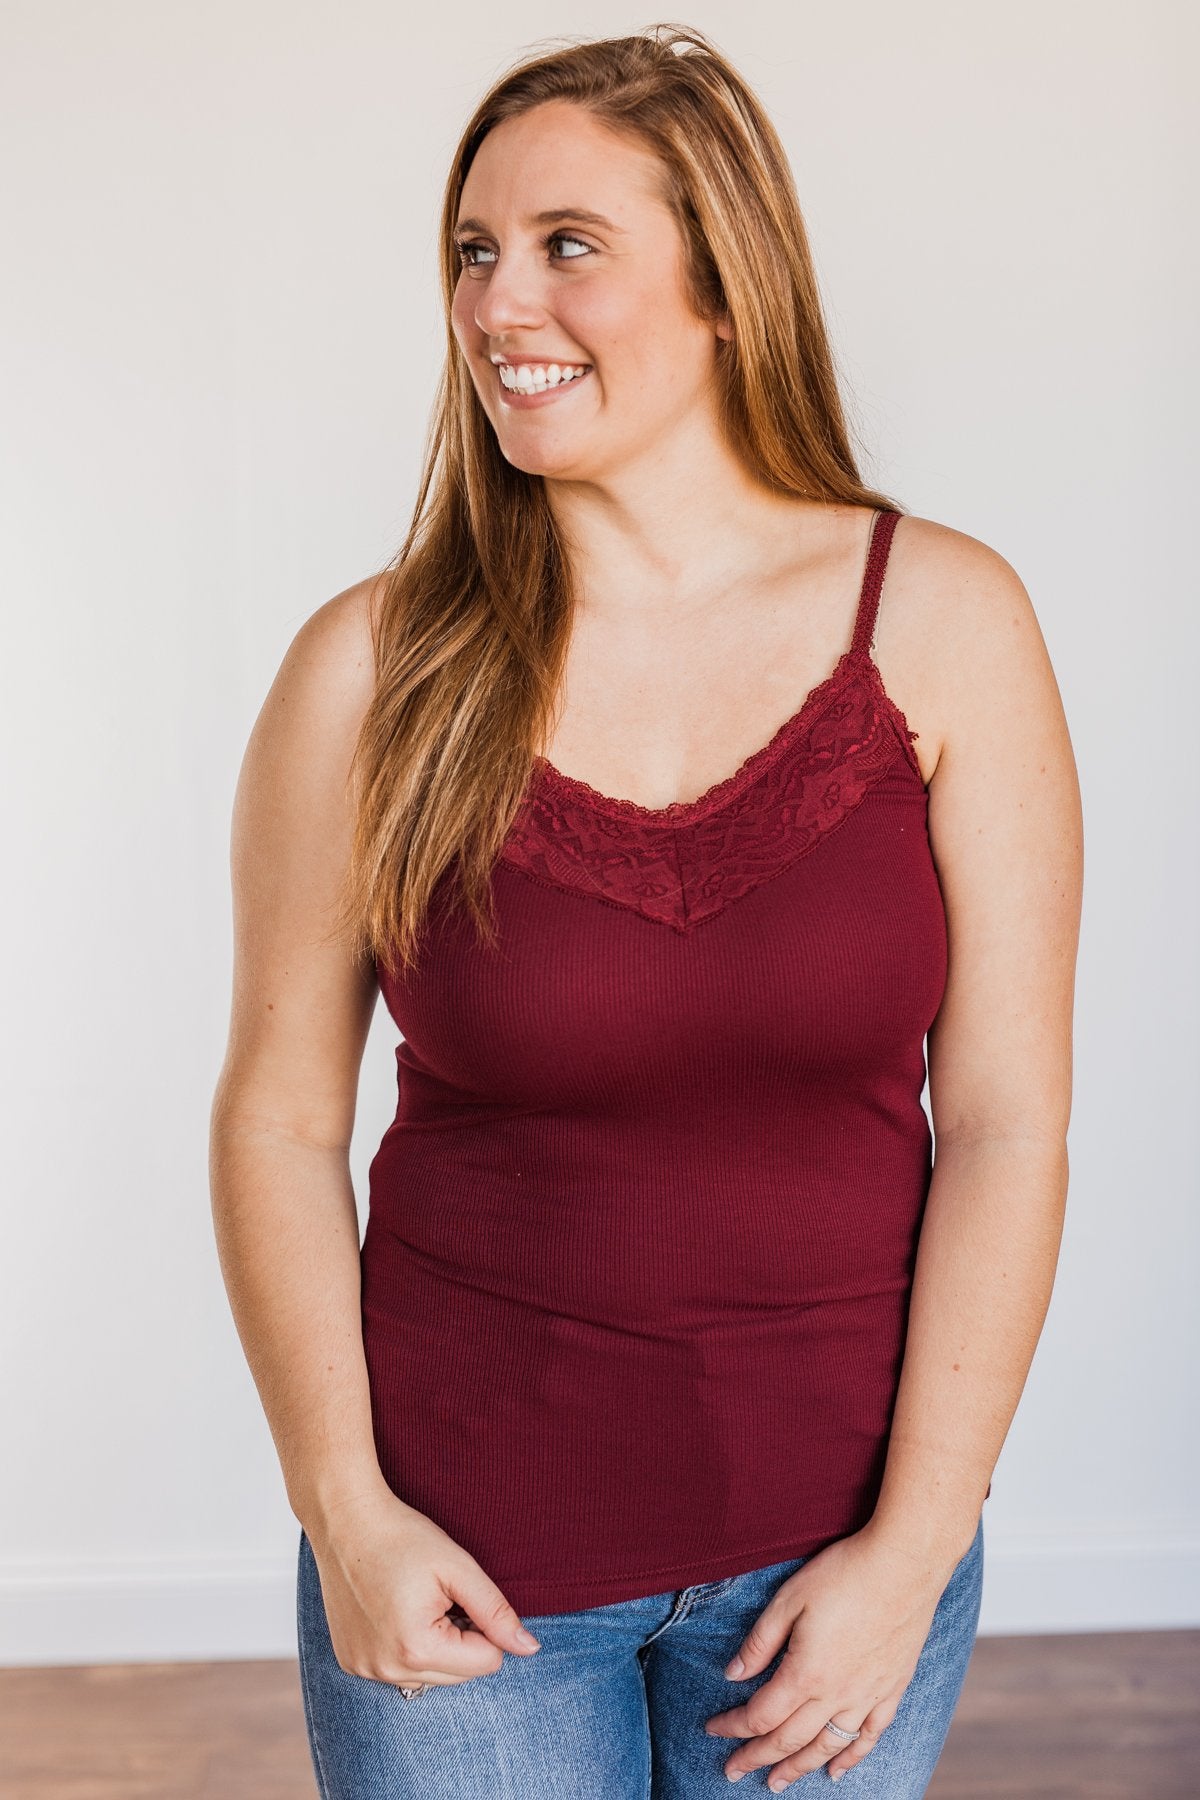 Pulse Basics Lace Trimmed Tank Top- Burgundy – The Pulse Boutique